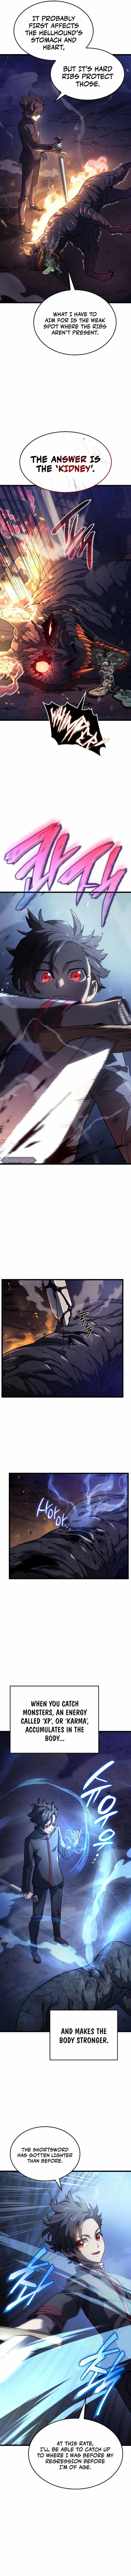 Revenge of the Iron-Blooded Sword Hound Chapter 5